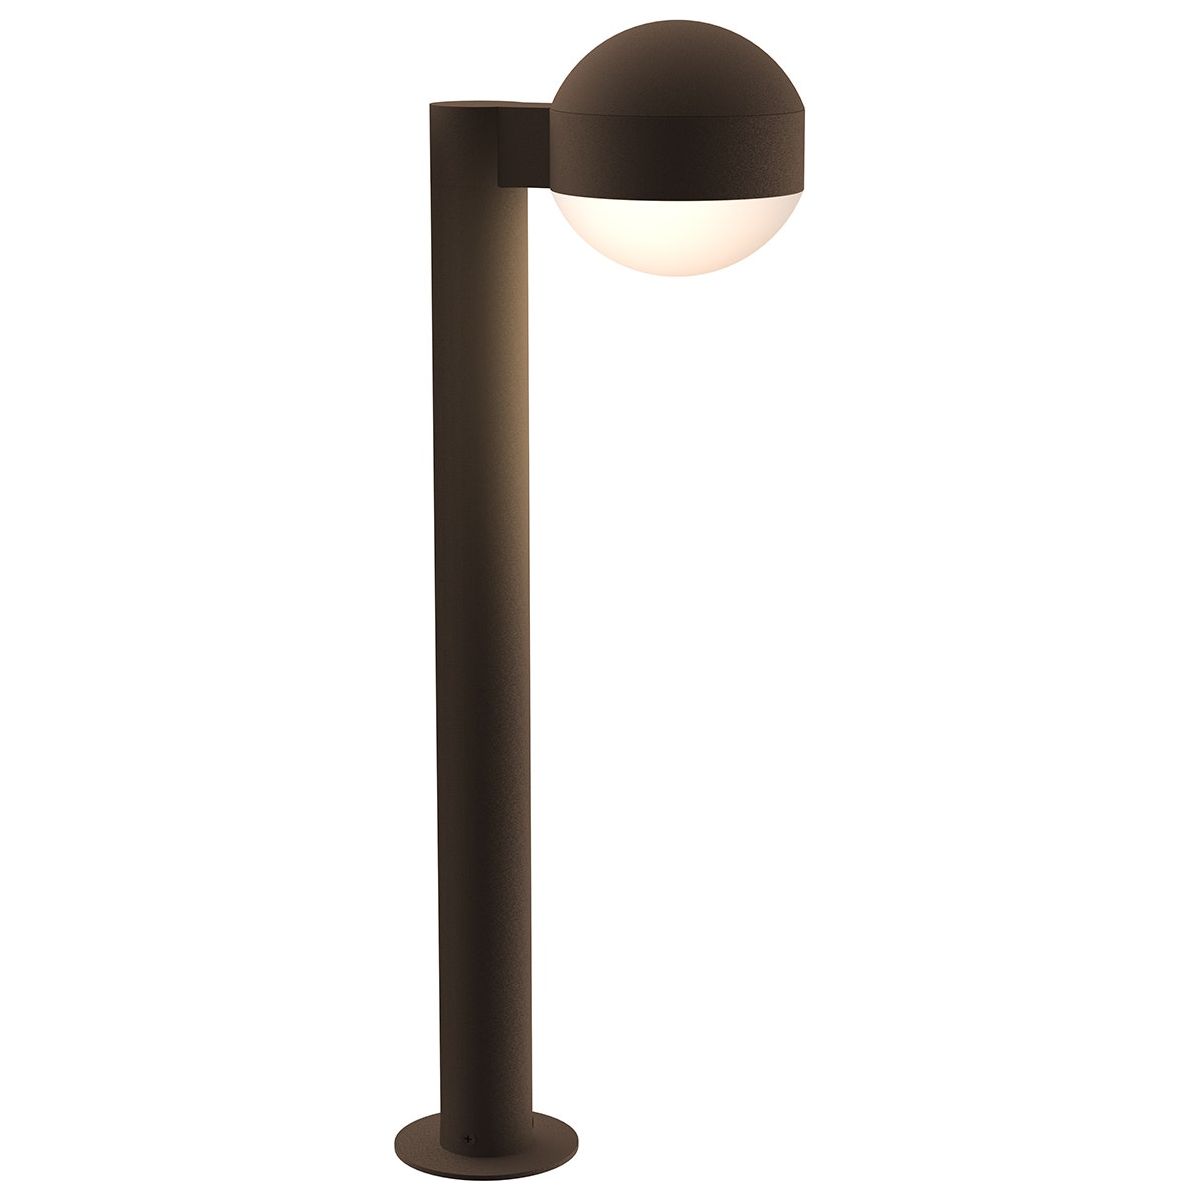 REALS 22" LED Bollard with Dome Cap and Dome Lens